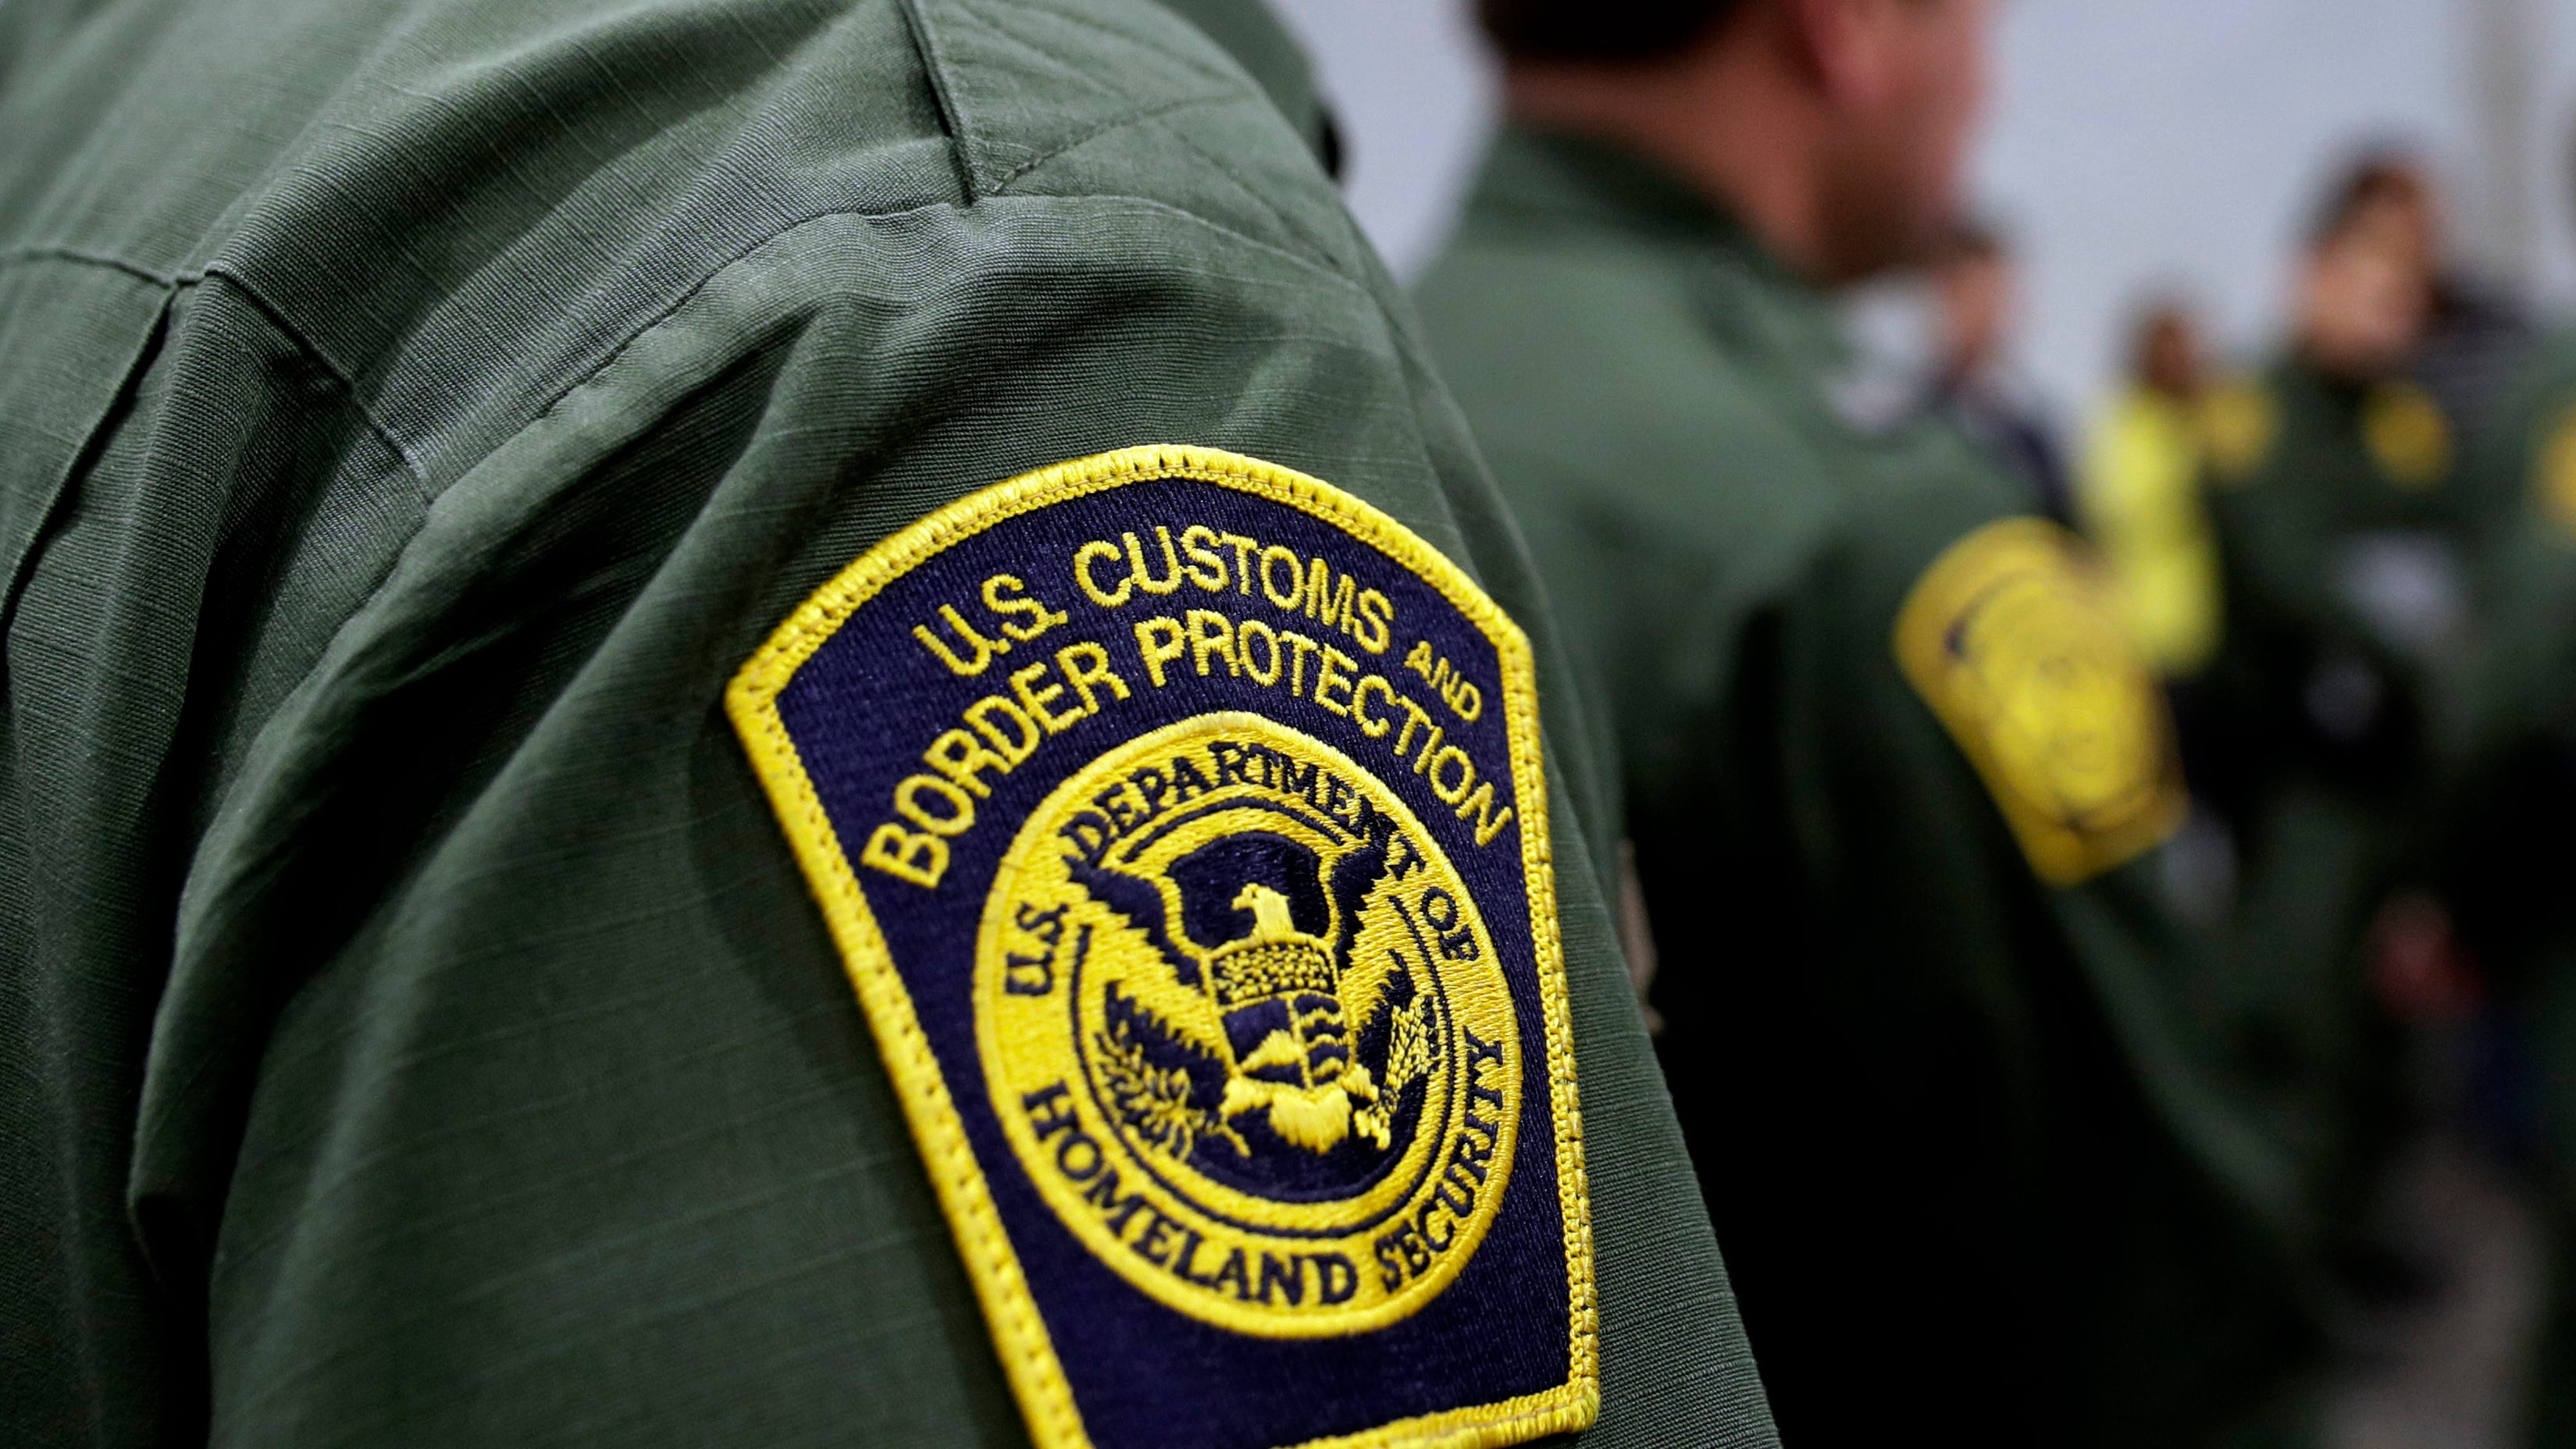 FILE - Border Patrol agents hold a news conference prior to a media tour of a new U.S. Customs and Border Protection temporary facility near the Donna International Bridge in Donna, Texas, May 2, 2019. The U.S. Border Patrol has agreed in a legal settlement announced Friday, May 19, 2023, to not set up interior checkpoints in a northern New Hampshire town just under 100 miles from the Canadian border before Jan. 1, 2025. (AP Photo/Eric Gay, File) ORG XMIT: NYAB502